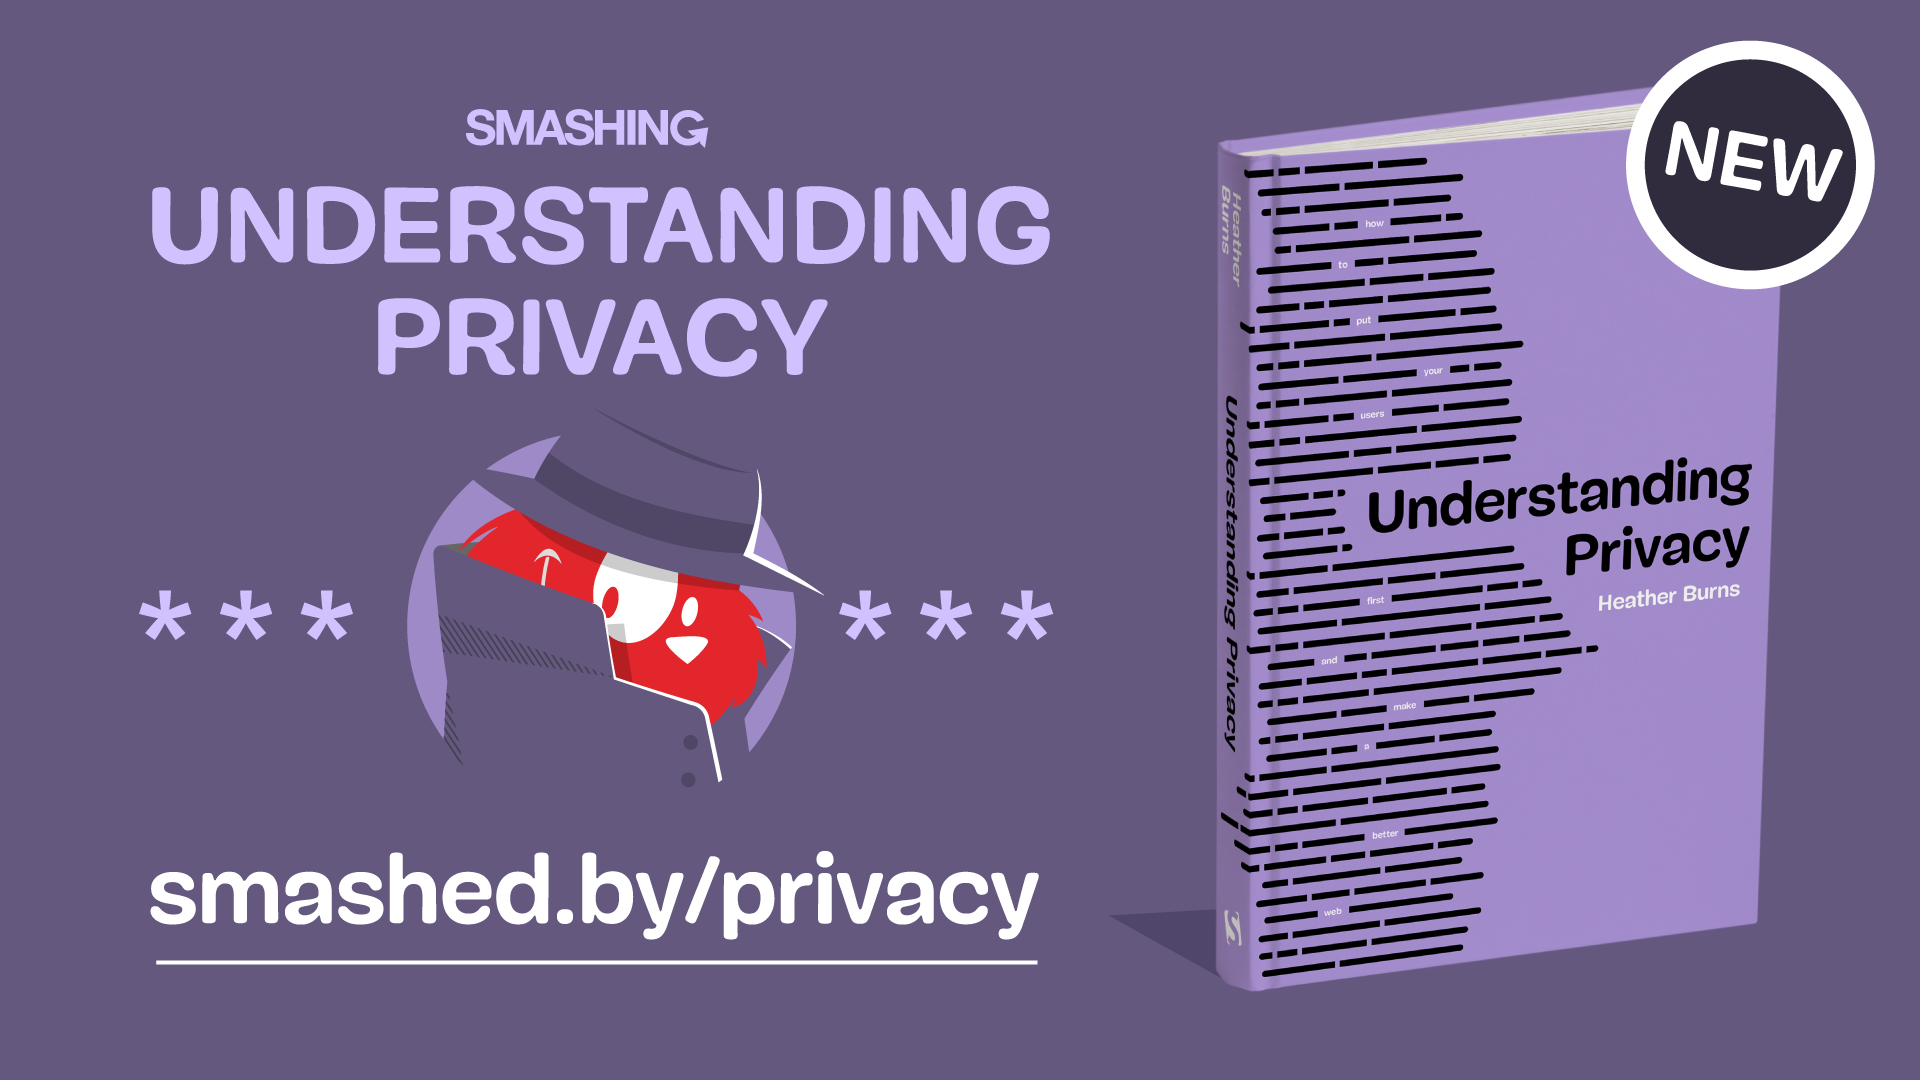 Meet Understanding Privacy, A New Smashing Book By Heather Burns